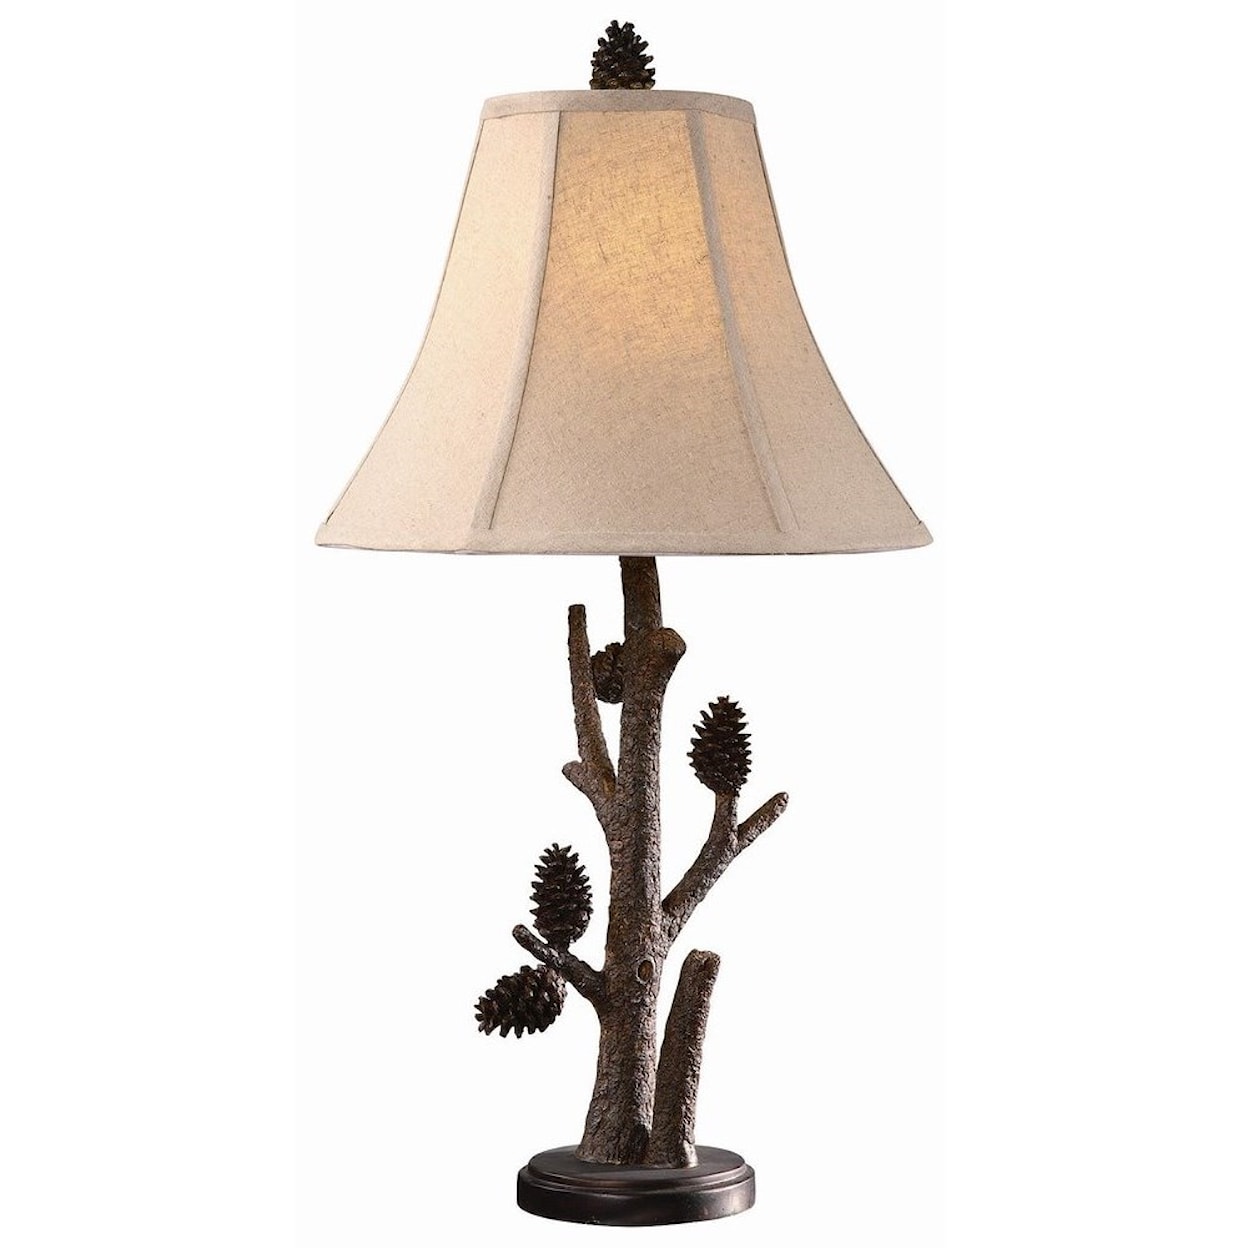 Crestview Collection Lighting Pioneer Table Lamp